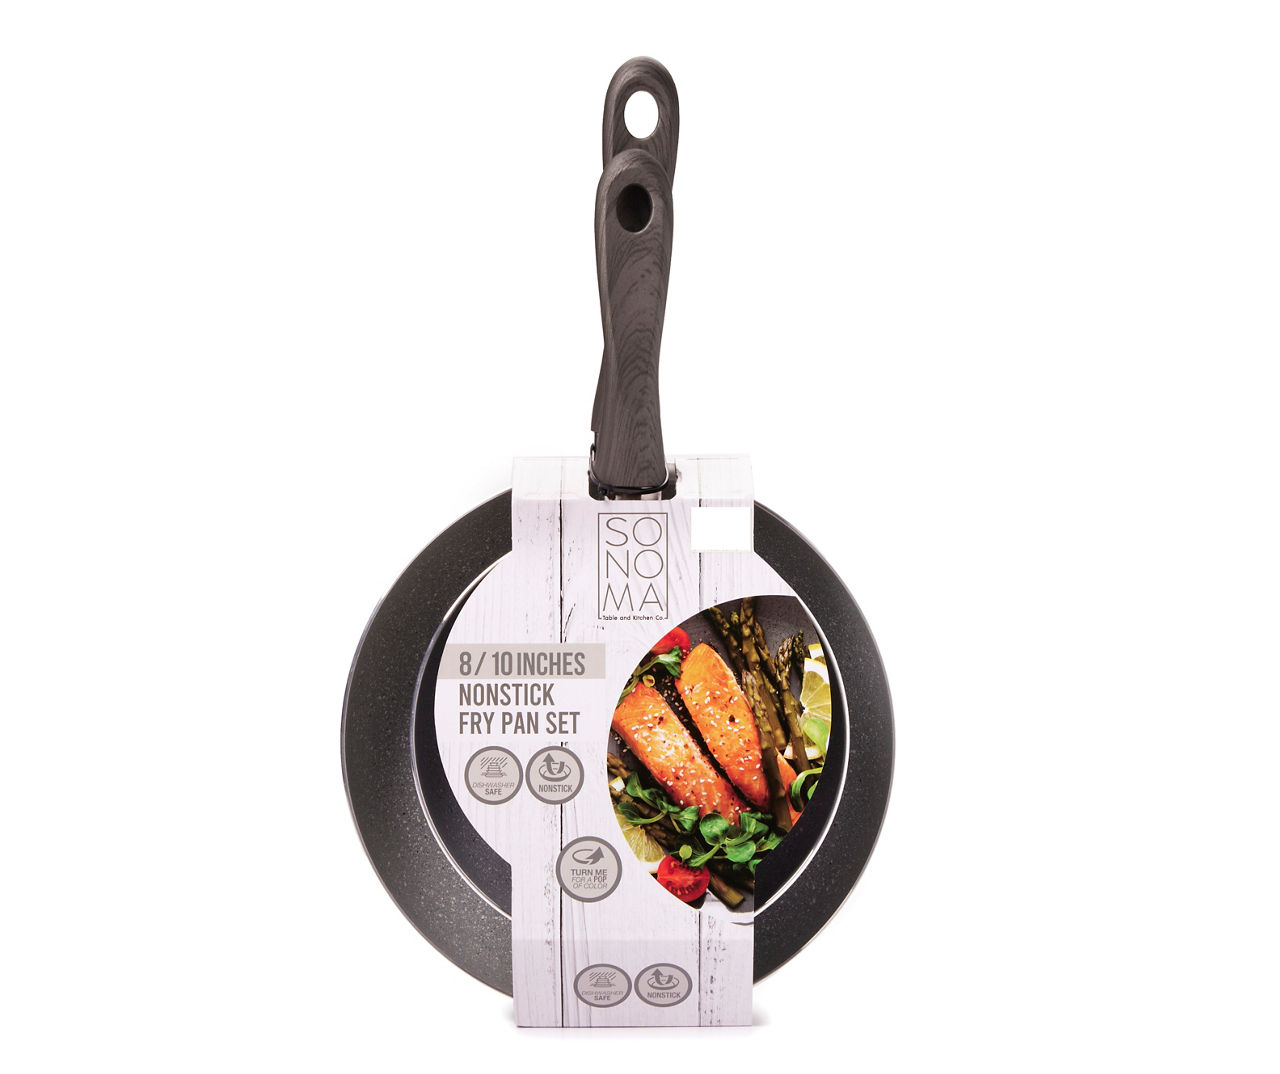  TINCOKO Large Nonstick Frying Skillet Pan with Lid